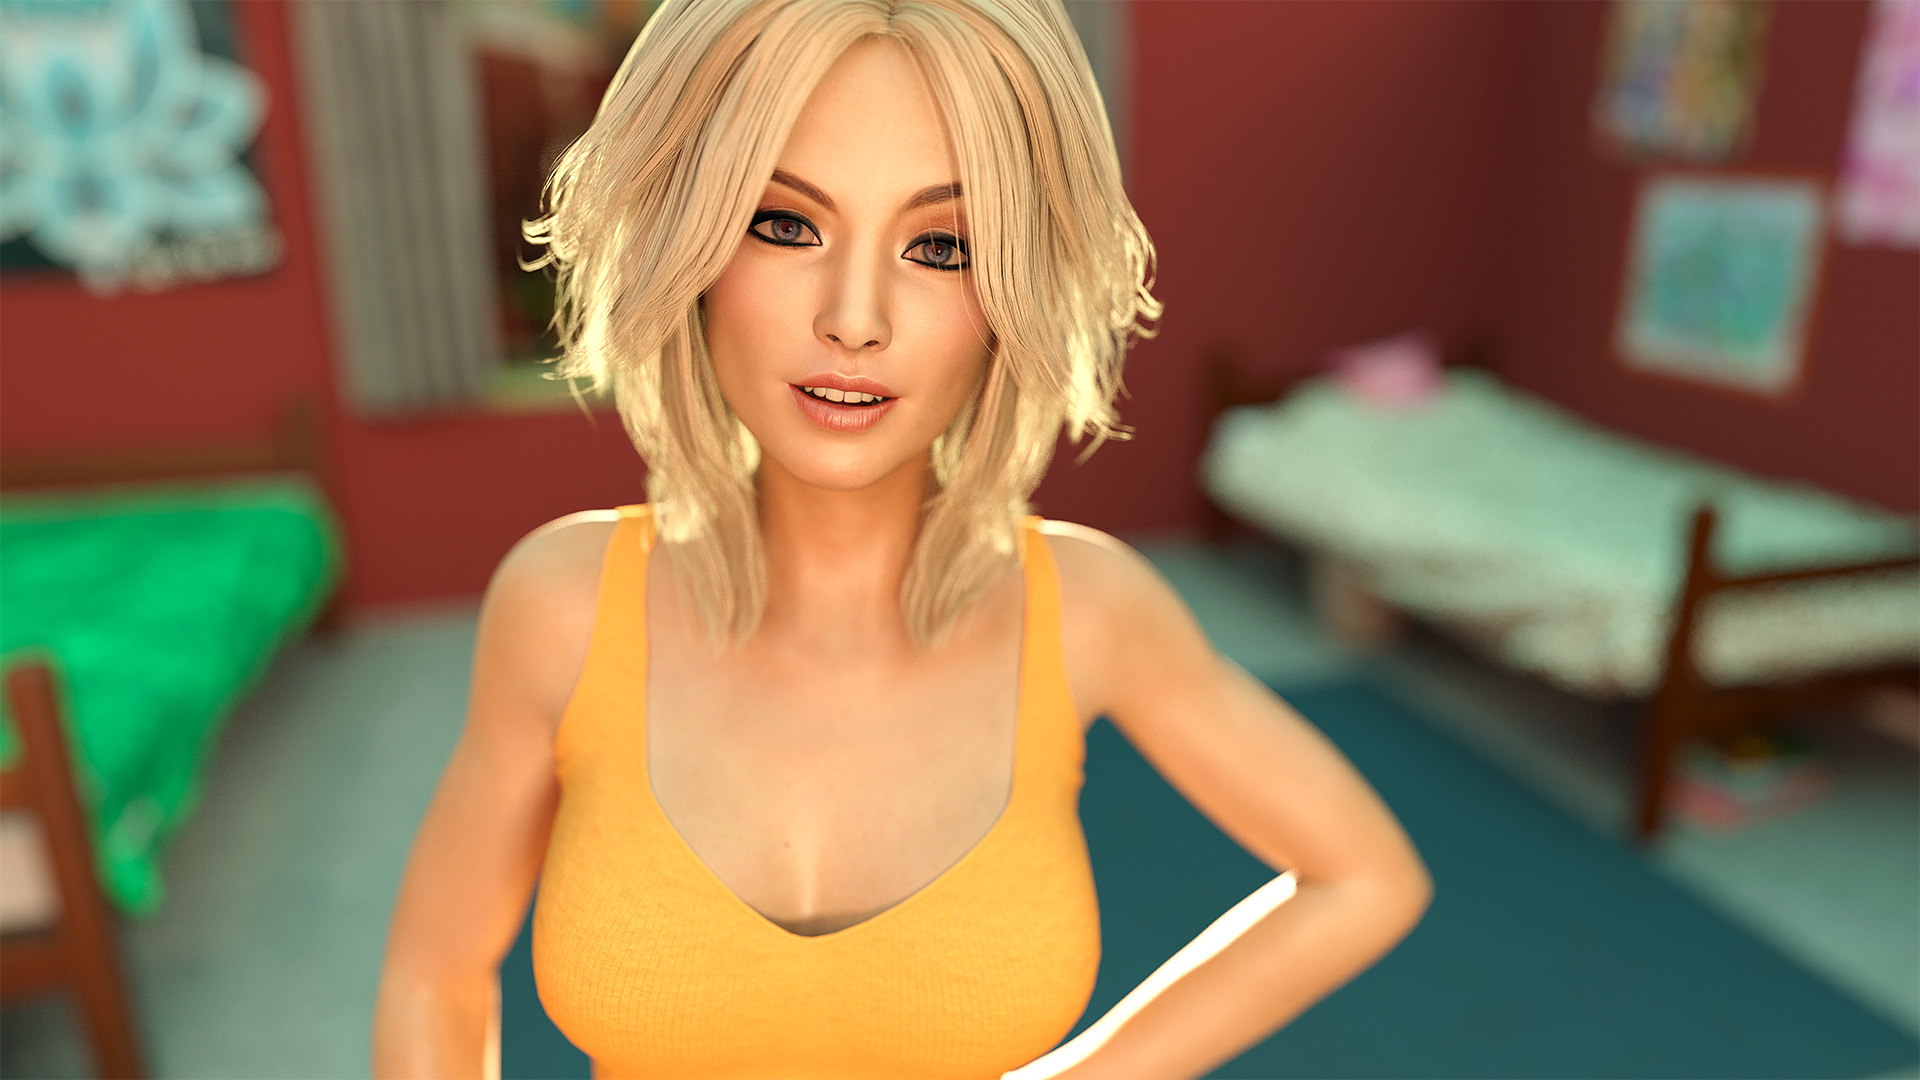 Nut reccomend acting lessons full game walkthrough download